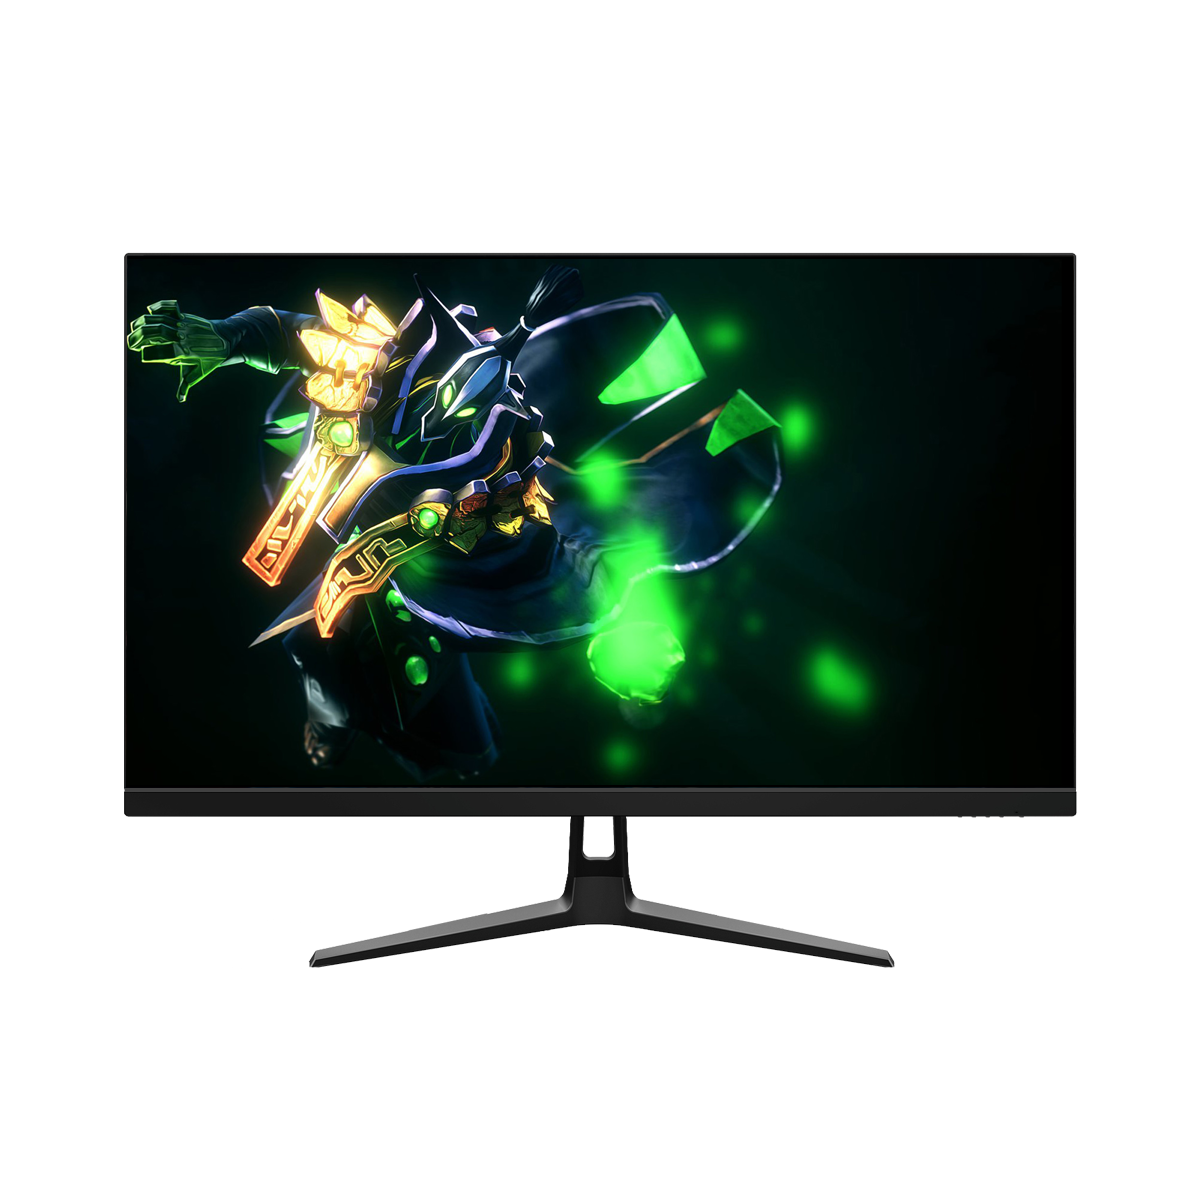 Model: PM25B-F240Hz Featured Image